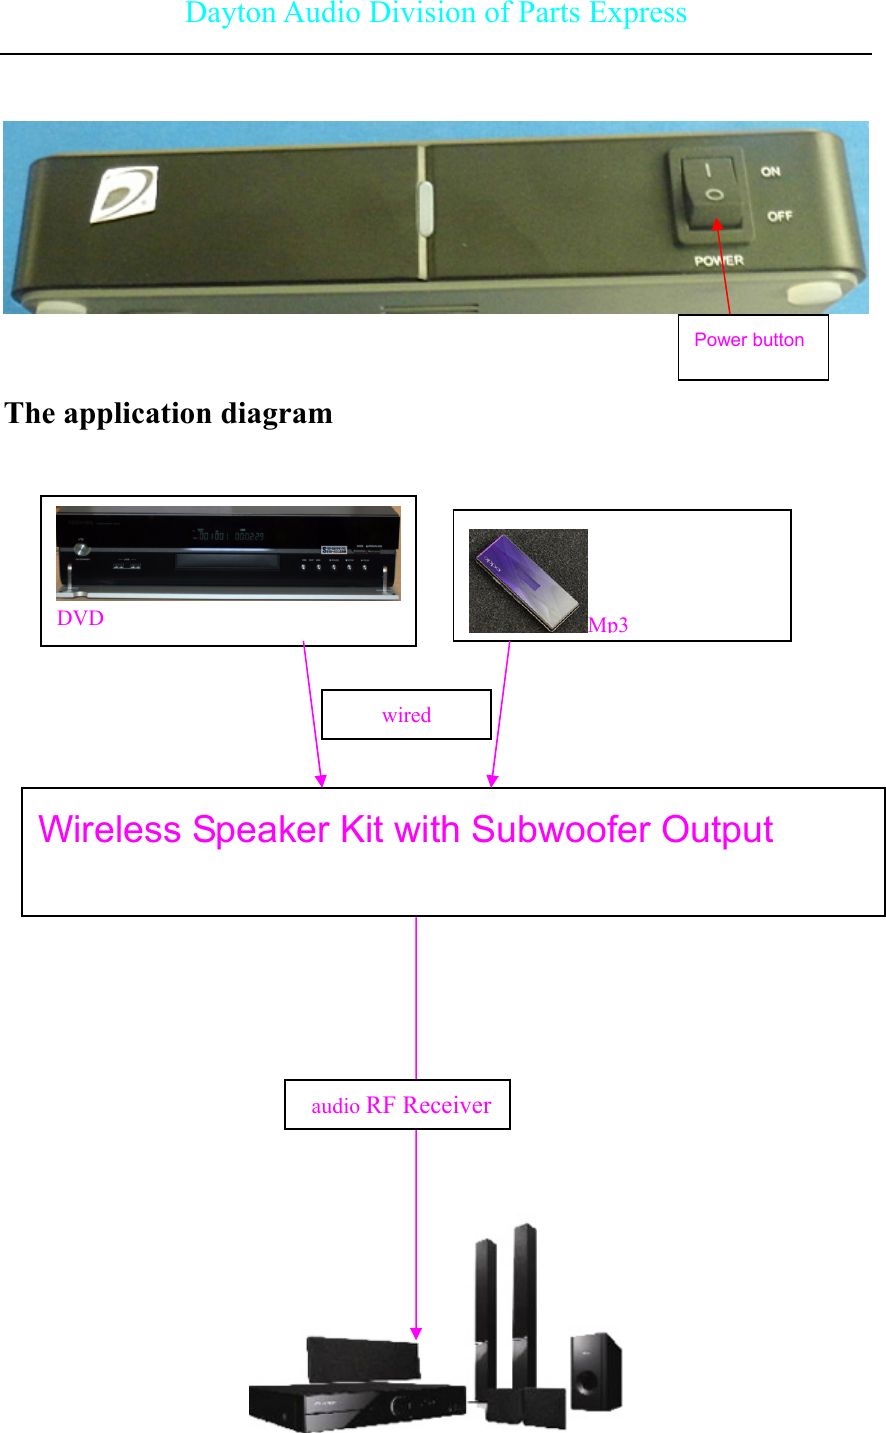 Dayton Audio Division of Parts Express     The application diagram                                                                                    DVD   Mp3Wireless Speaker Kit with Subwoofer Output wired audio RF ReceiverPower button     